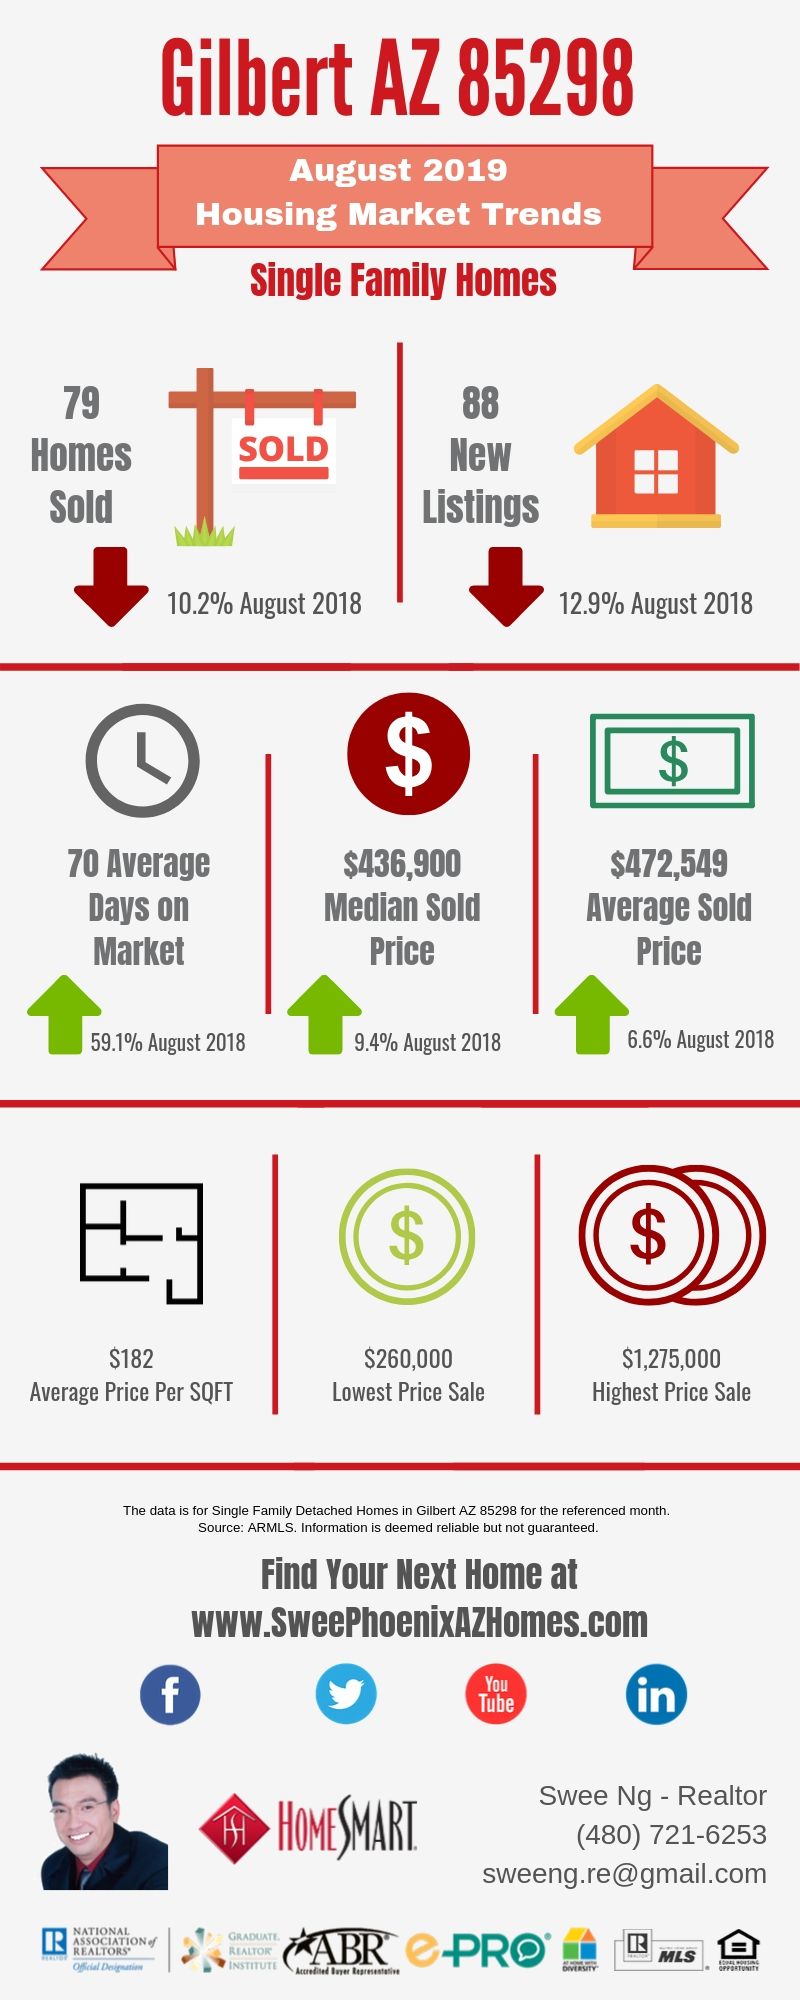 Gilbert AZ 85298 Housing Market Trends Report August 2019 by Swee Ng, Real Estate and House Value